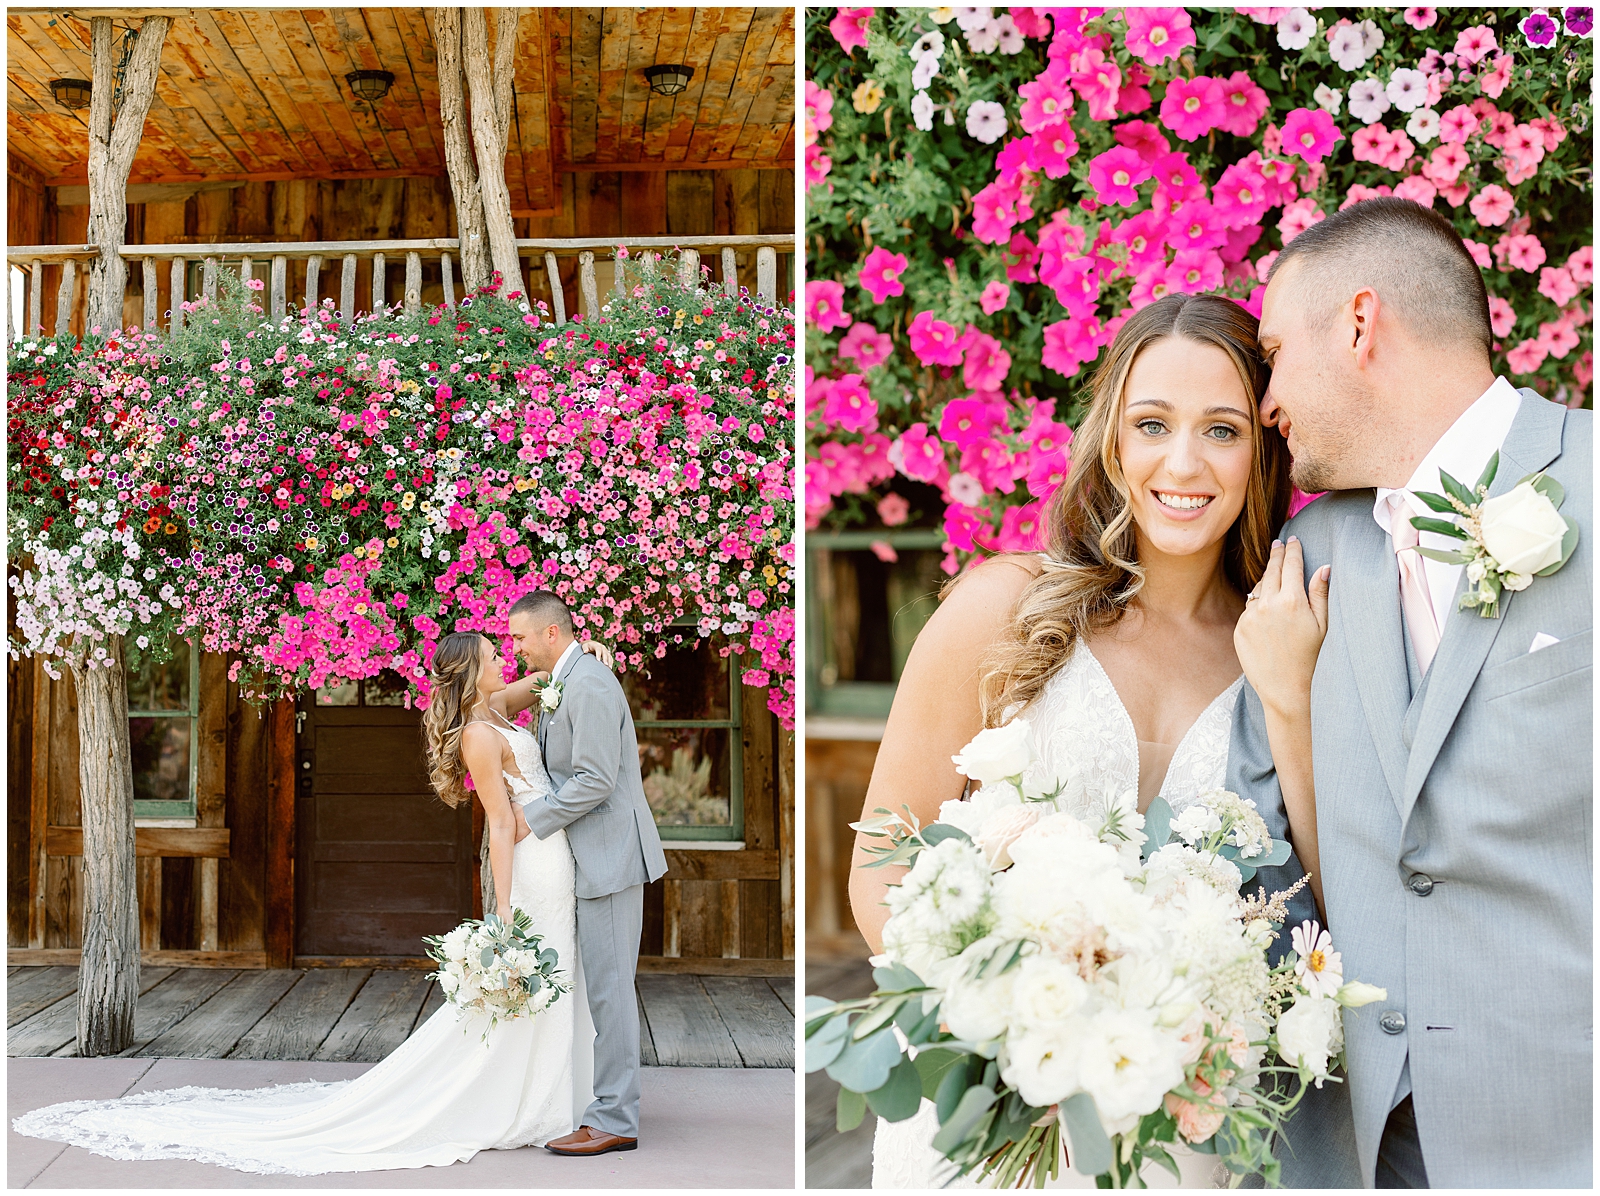 Bride and Groom First Look Portraits at Blush Still Water Hollow Wedding